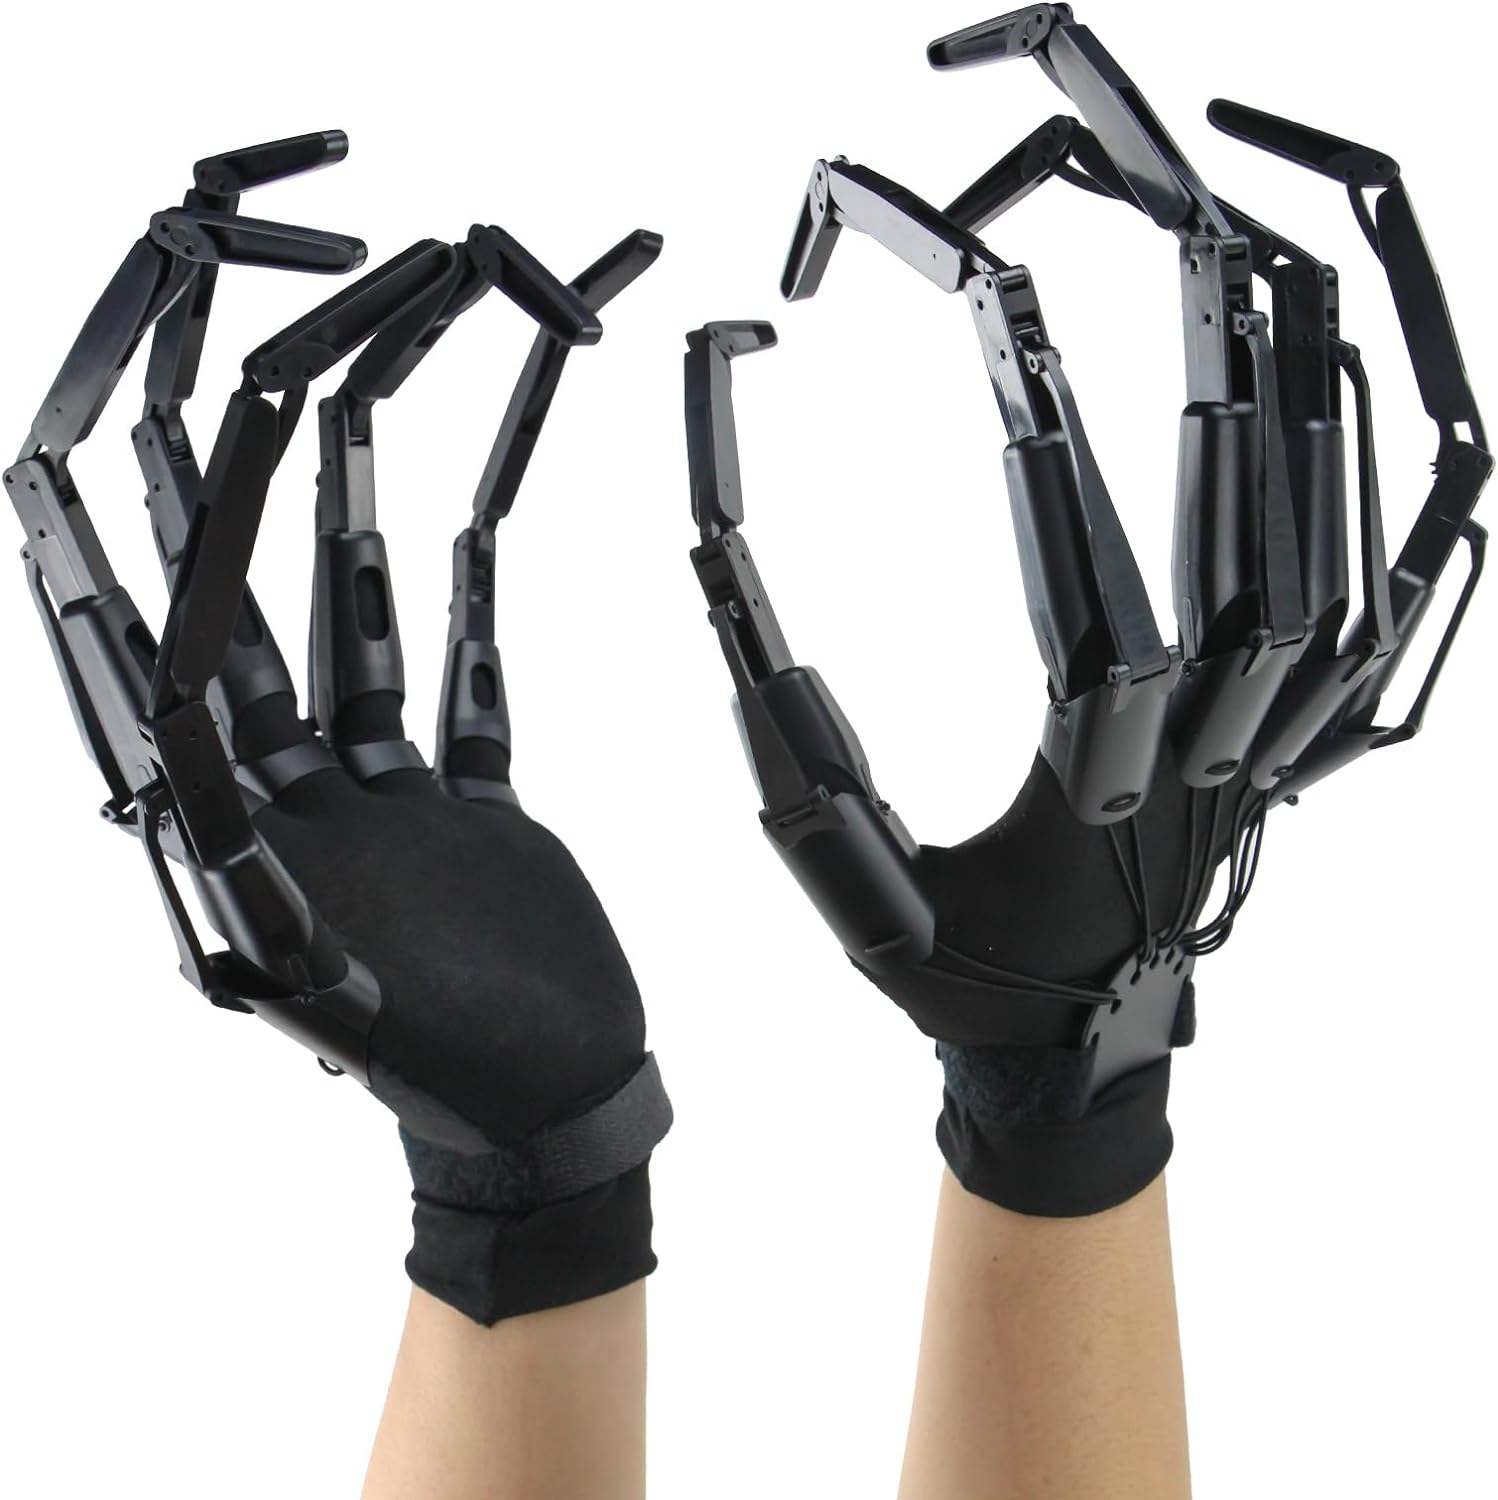 Halloween Articulated Fingers with Gloves,Articulated Finger Extensions,Scary Skeleton Bone Claw Hand